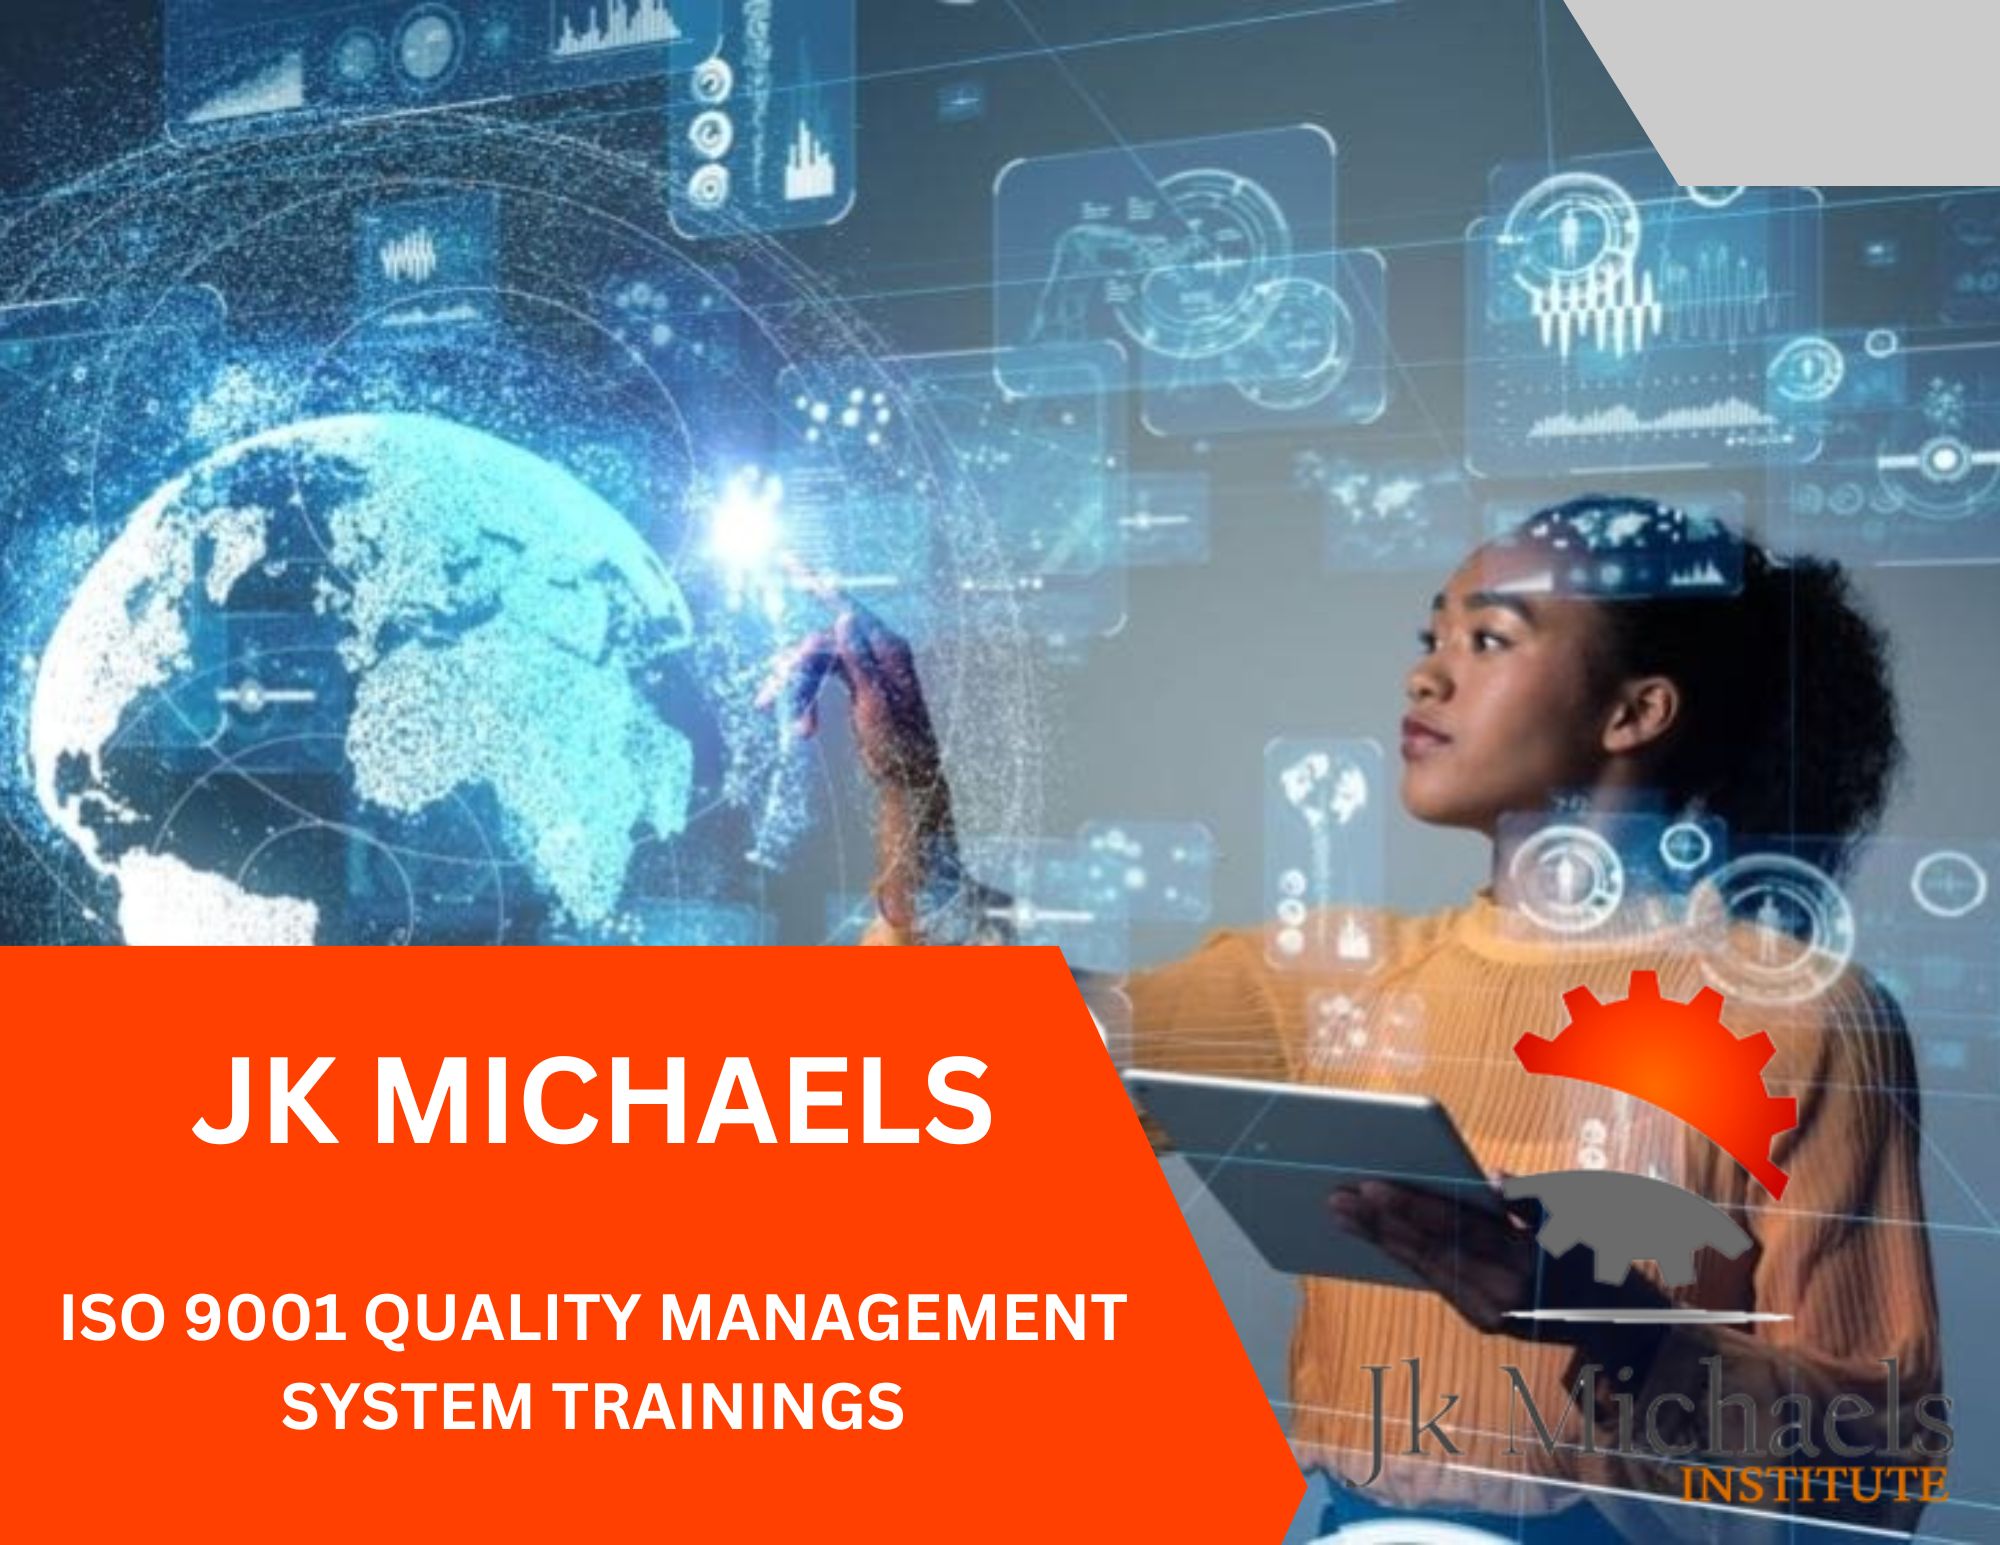 ISO 9001 QUALITY MANAGEMENT SYSTEM TRAININGS